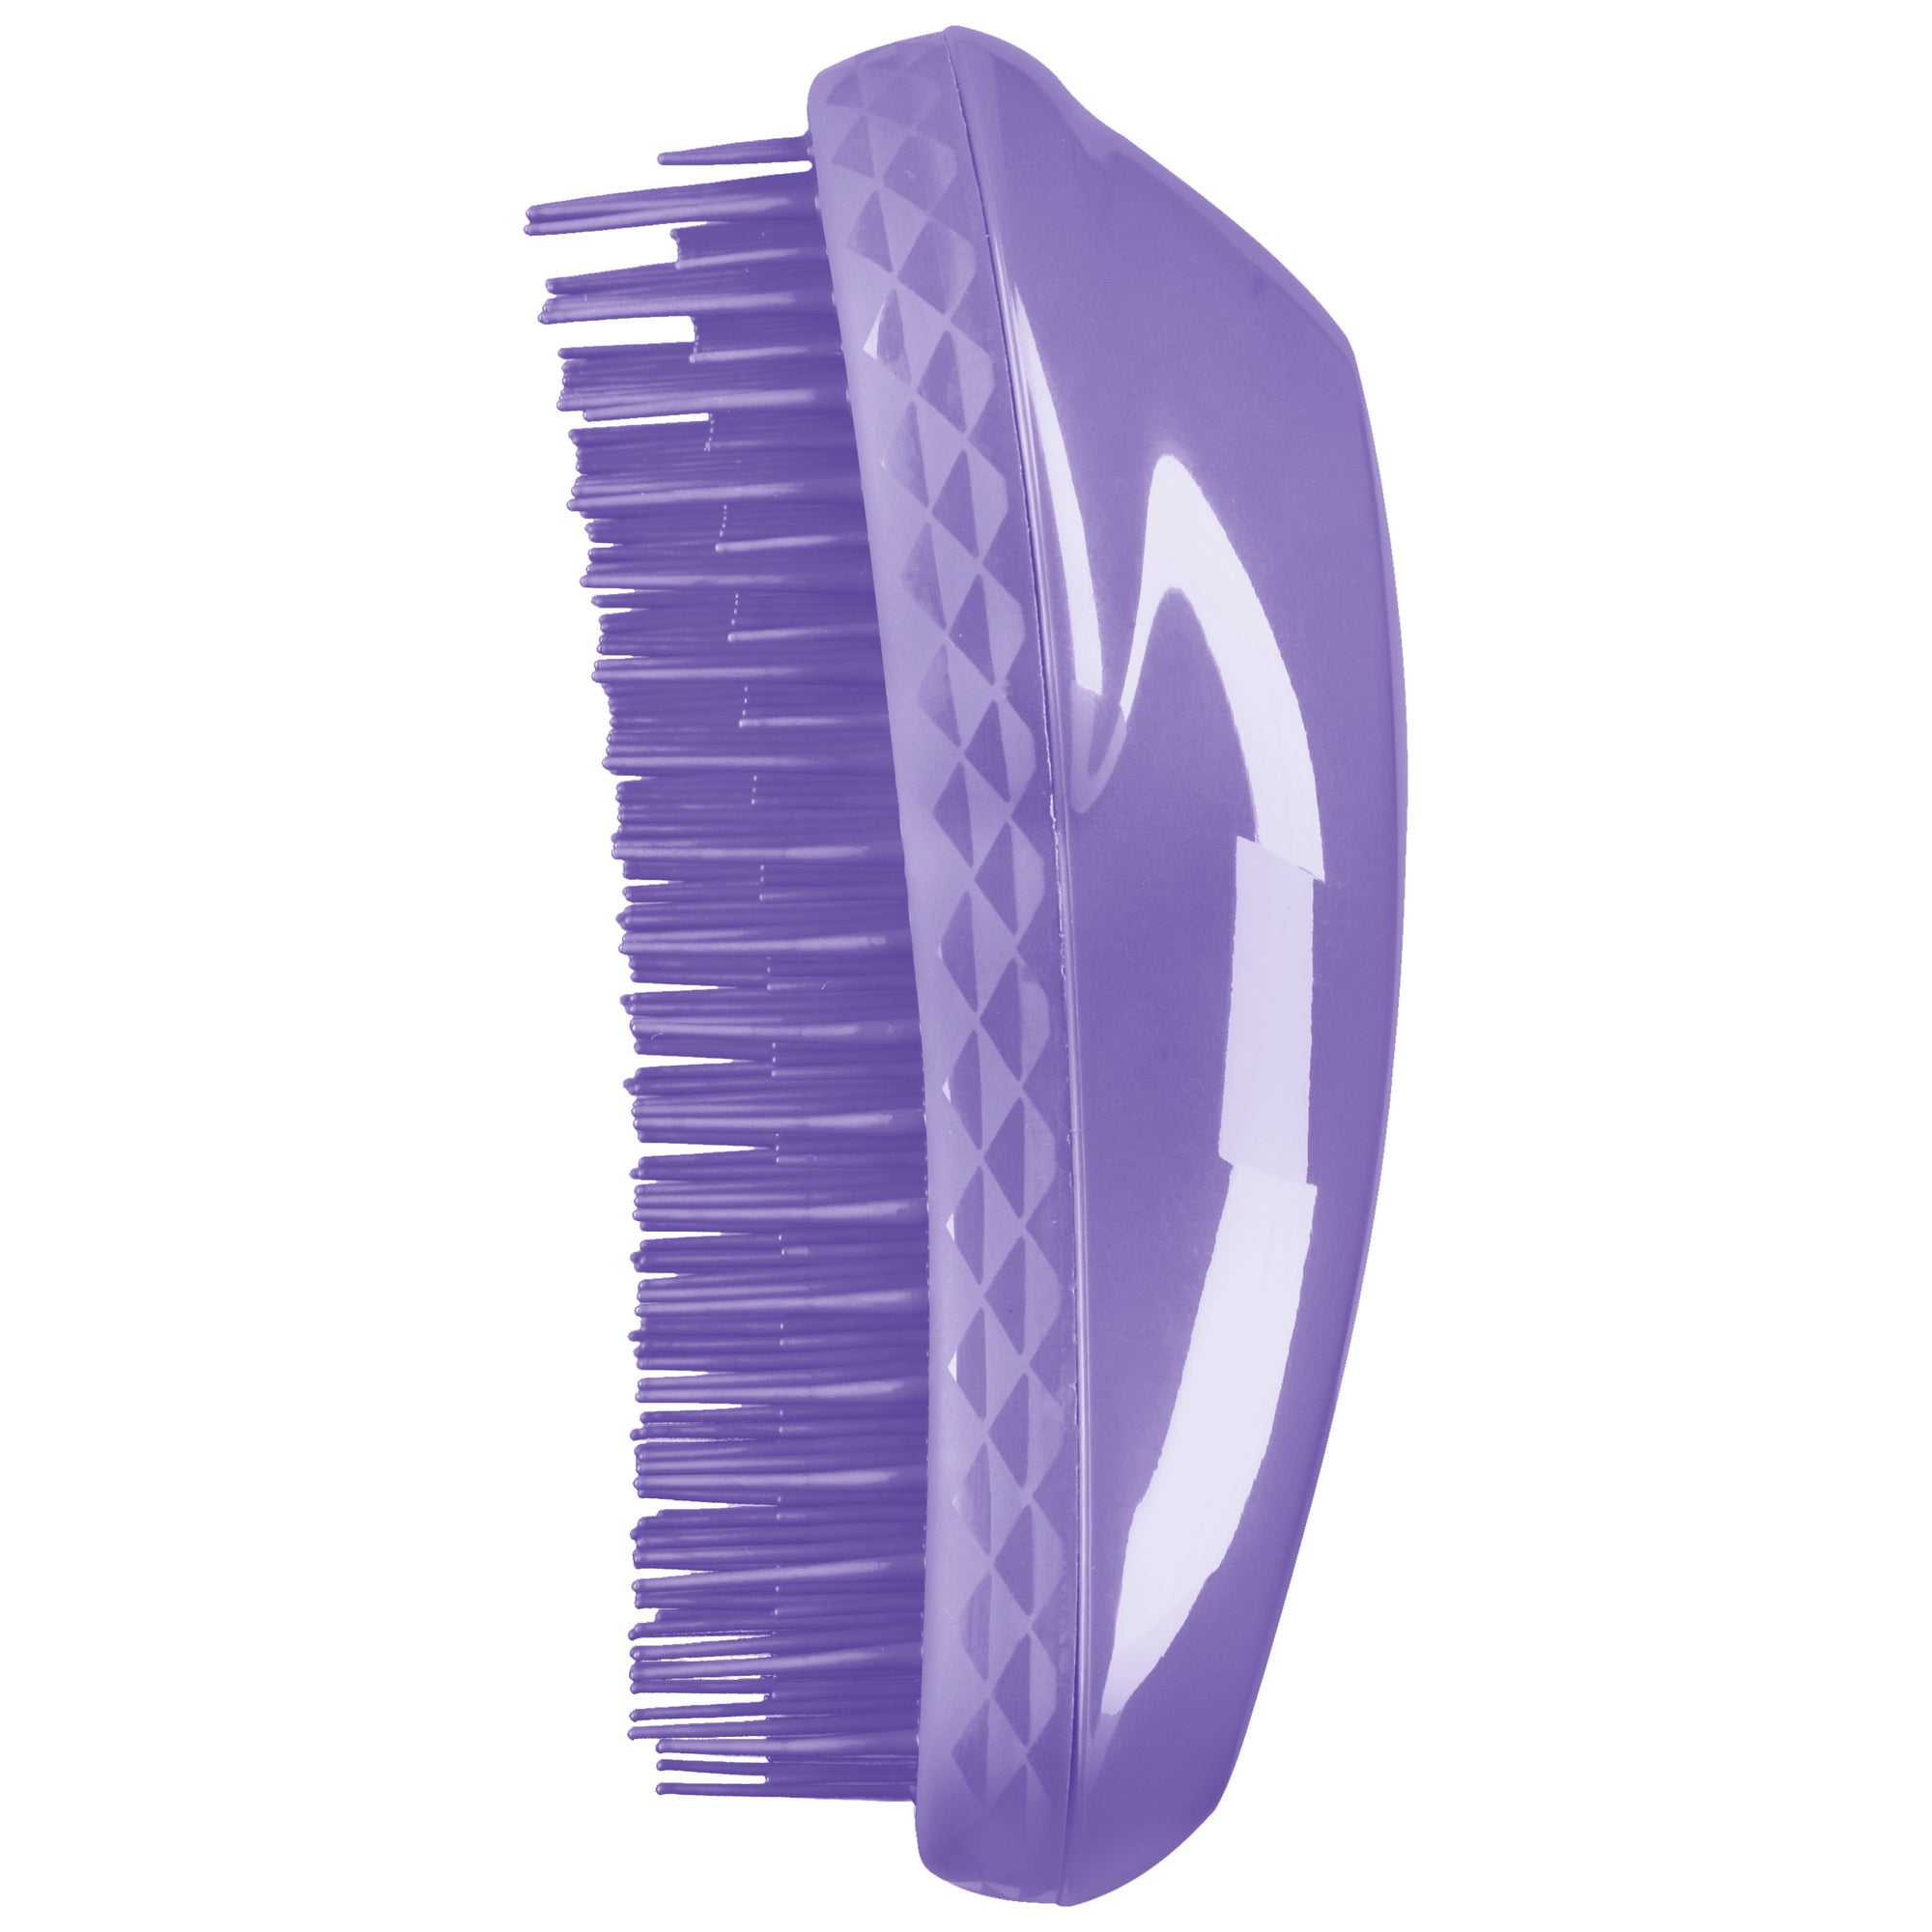 Tangle Teezer Thick and Curly – Azure Blue